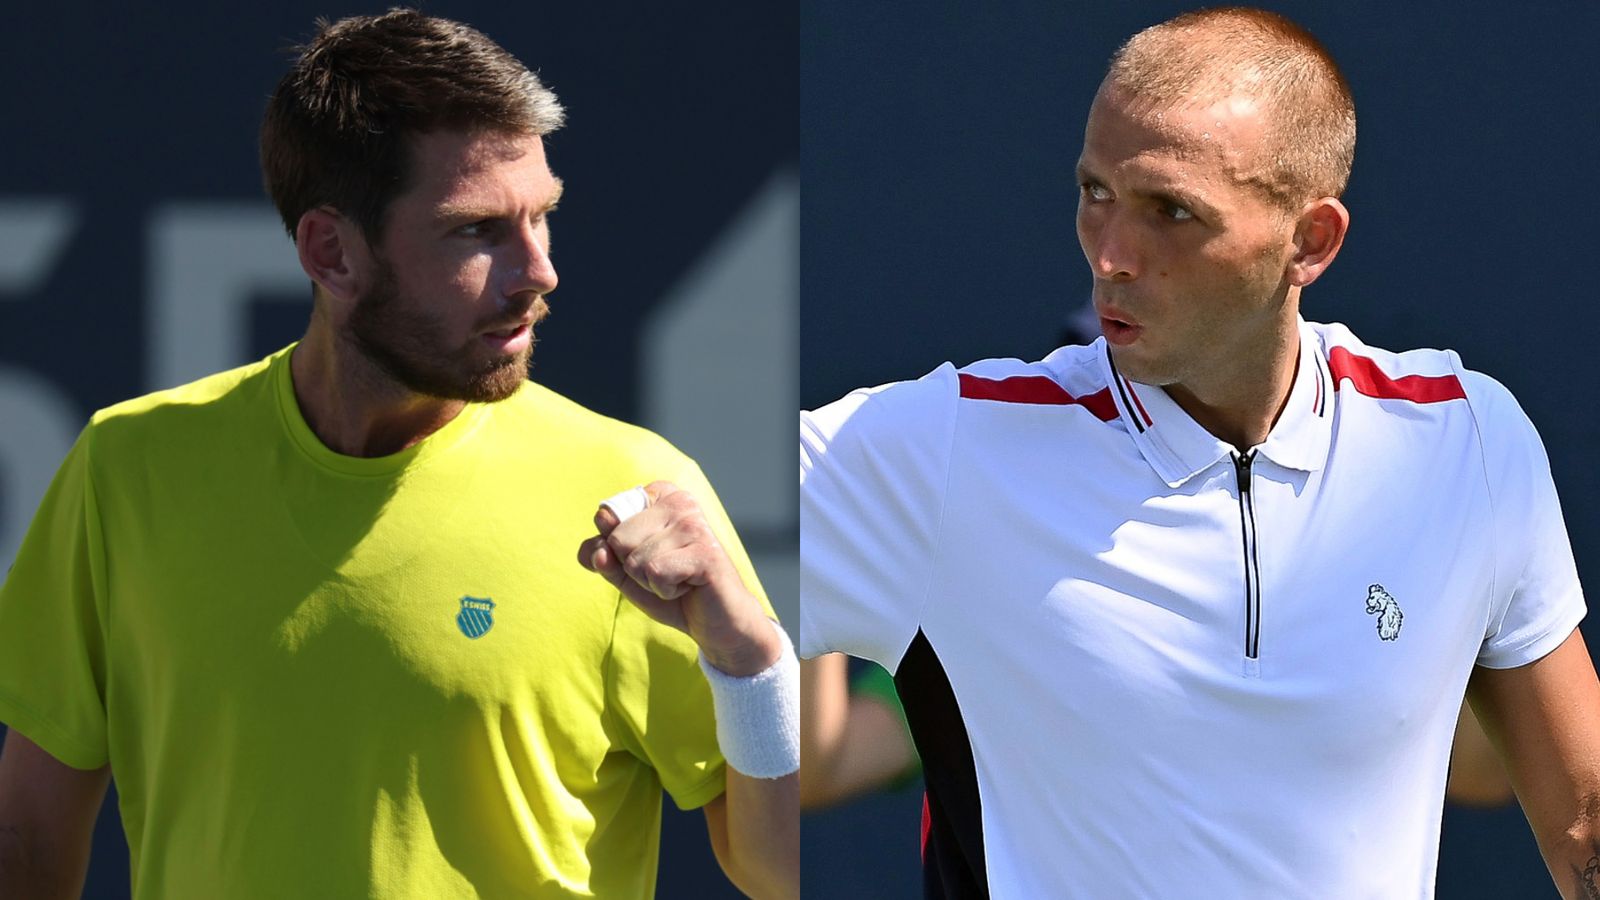 US Open: Cameron Norrie and Dan Evans will attempt to reach the fourth round on Saturday